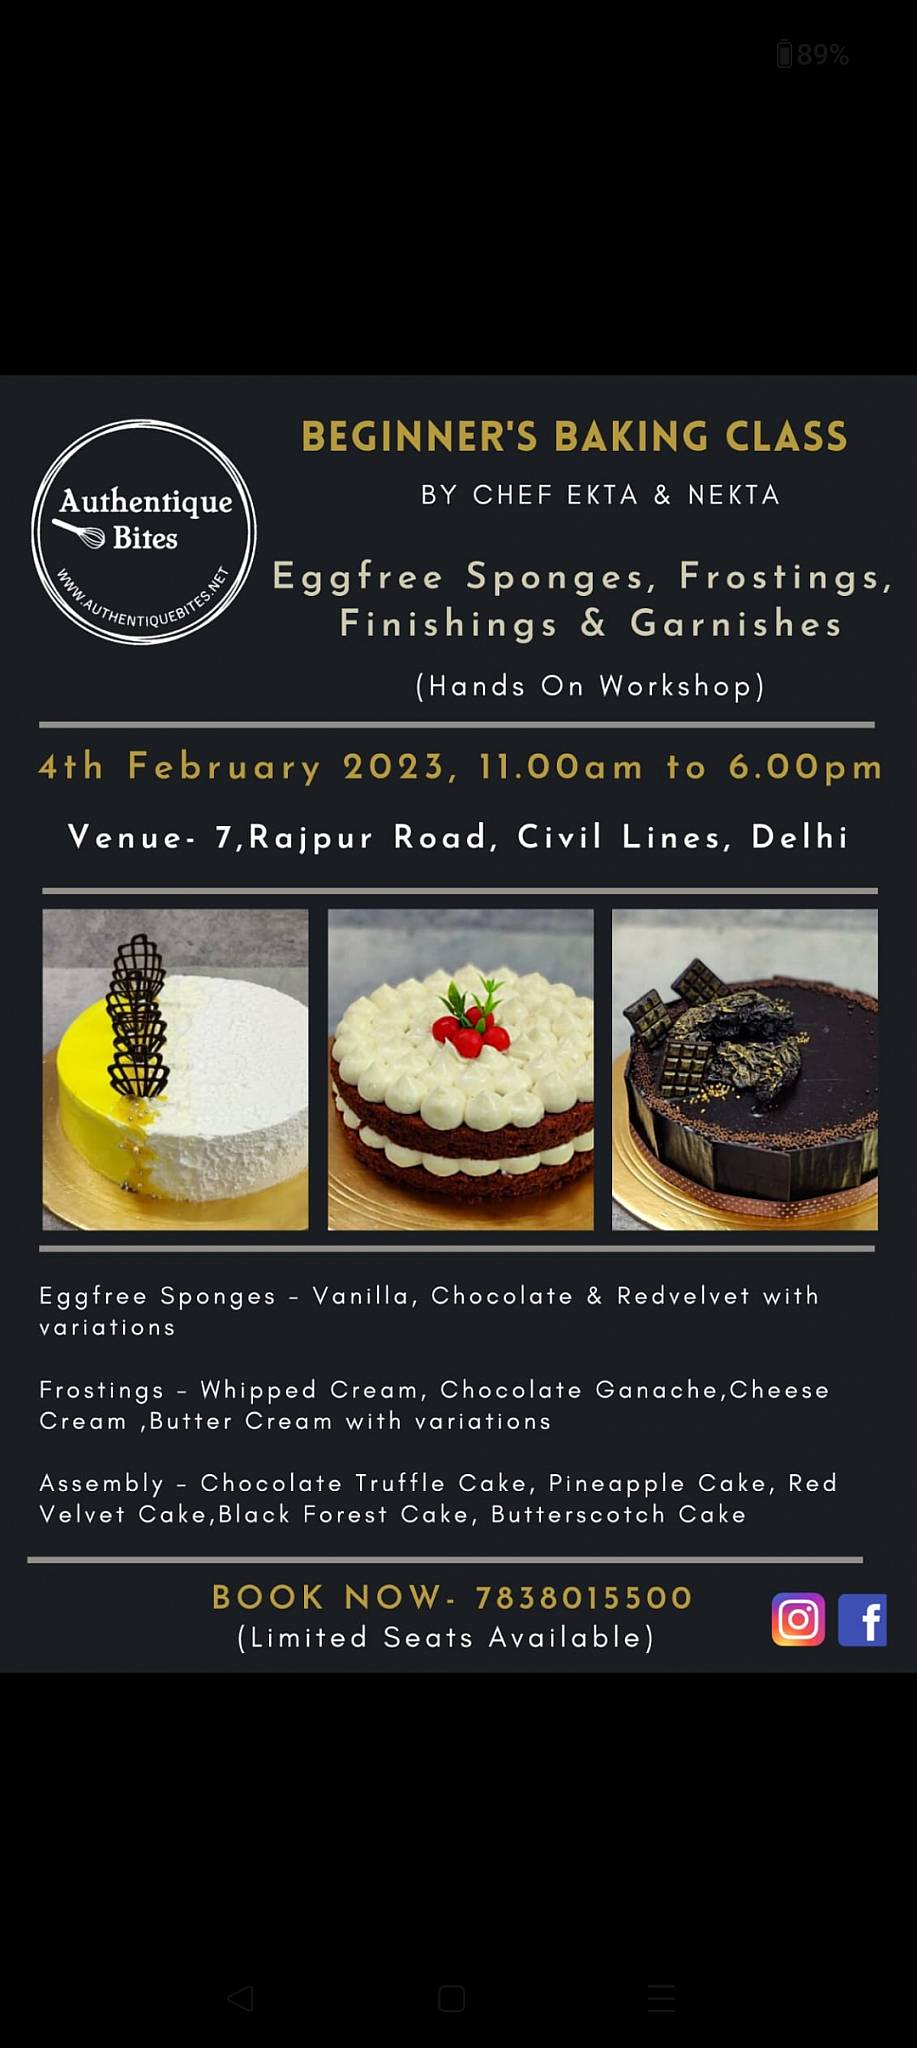 Mommys made bakery and baking classes, Delhi - Restaurant menu and reviews